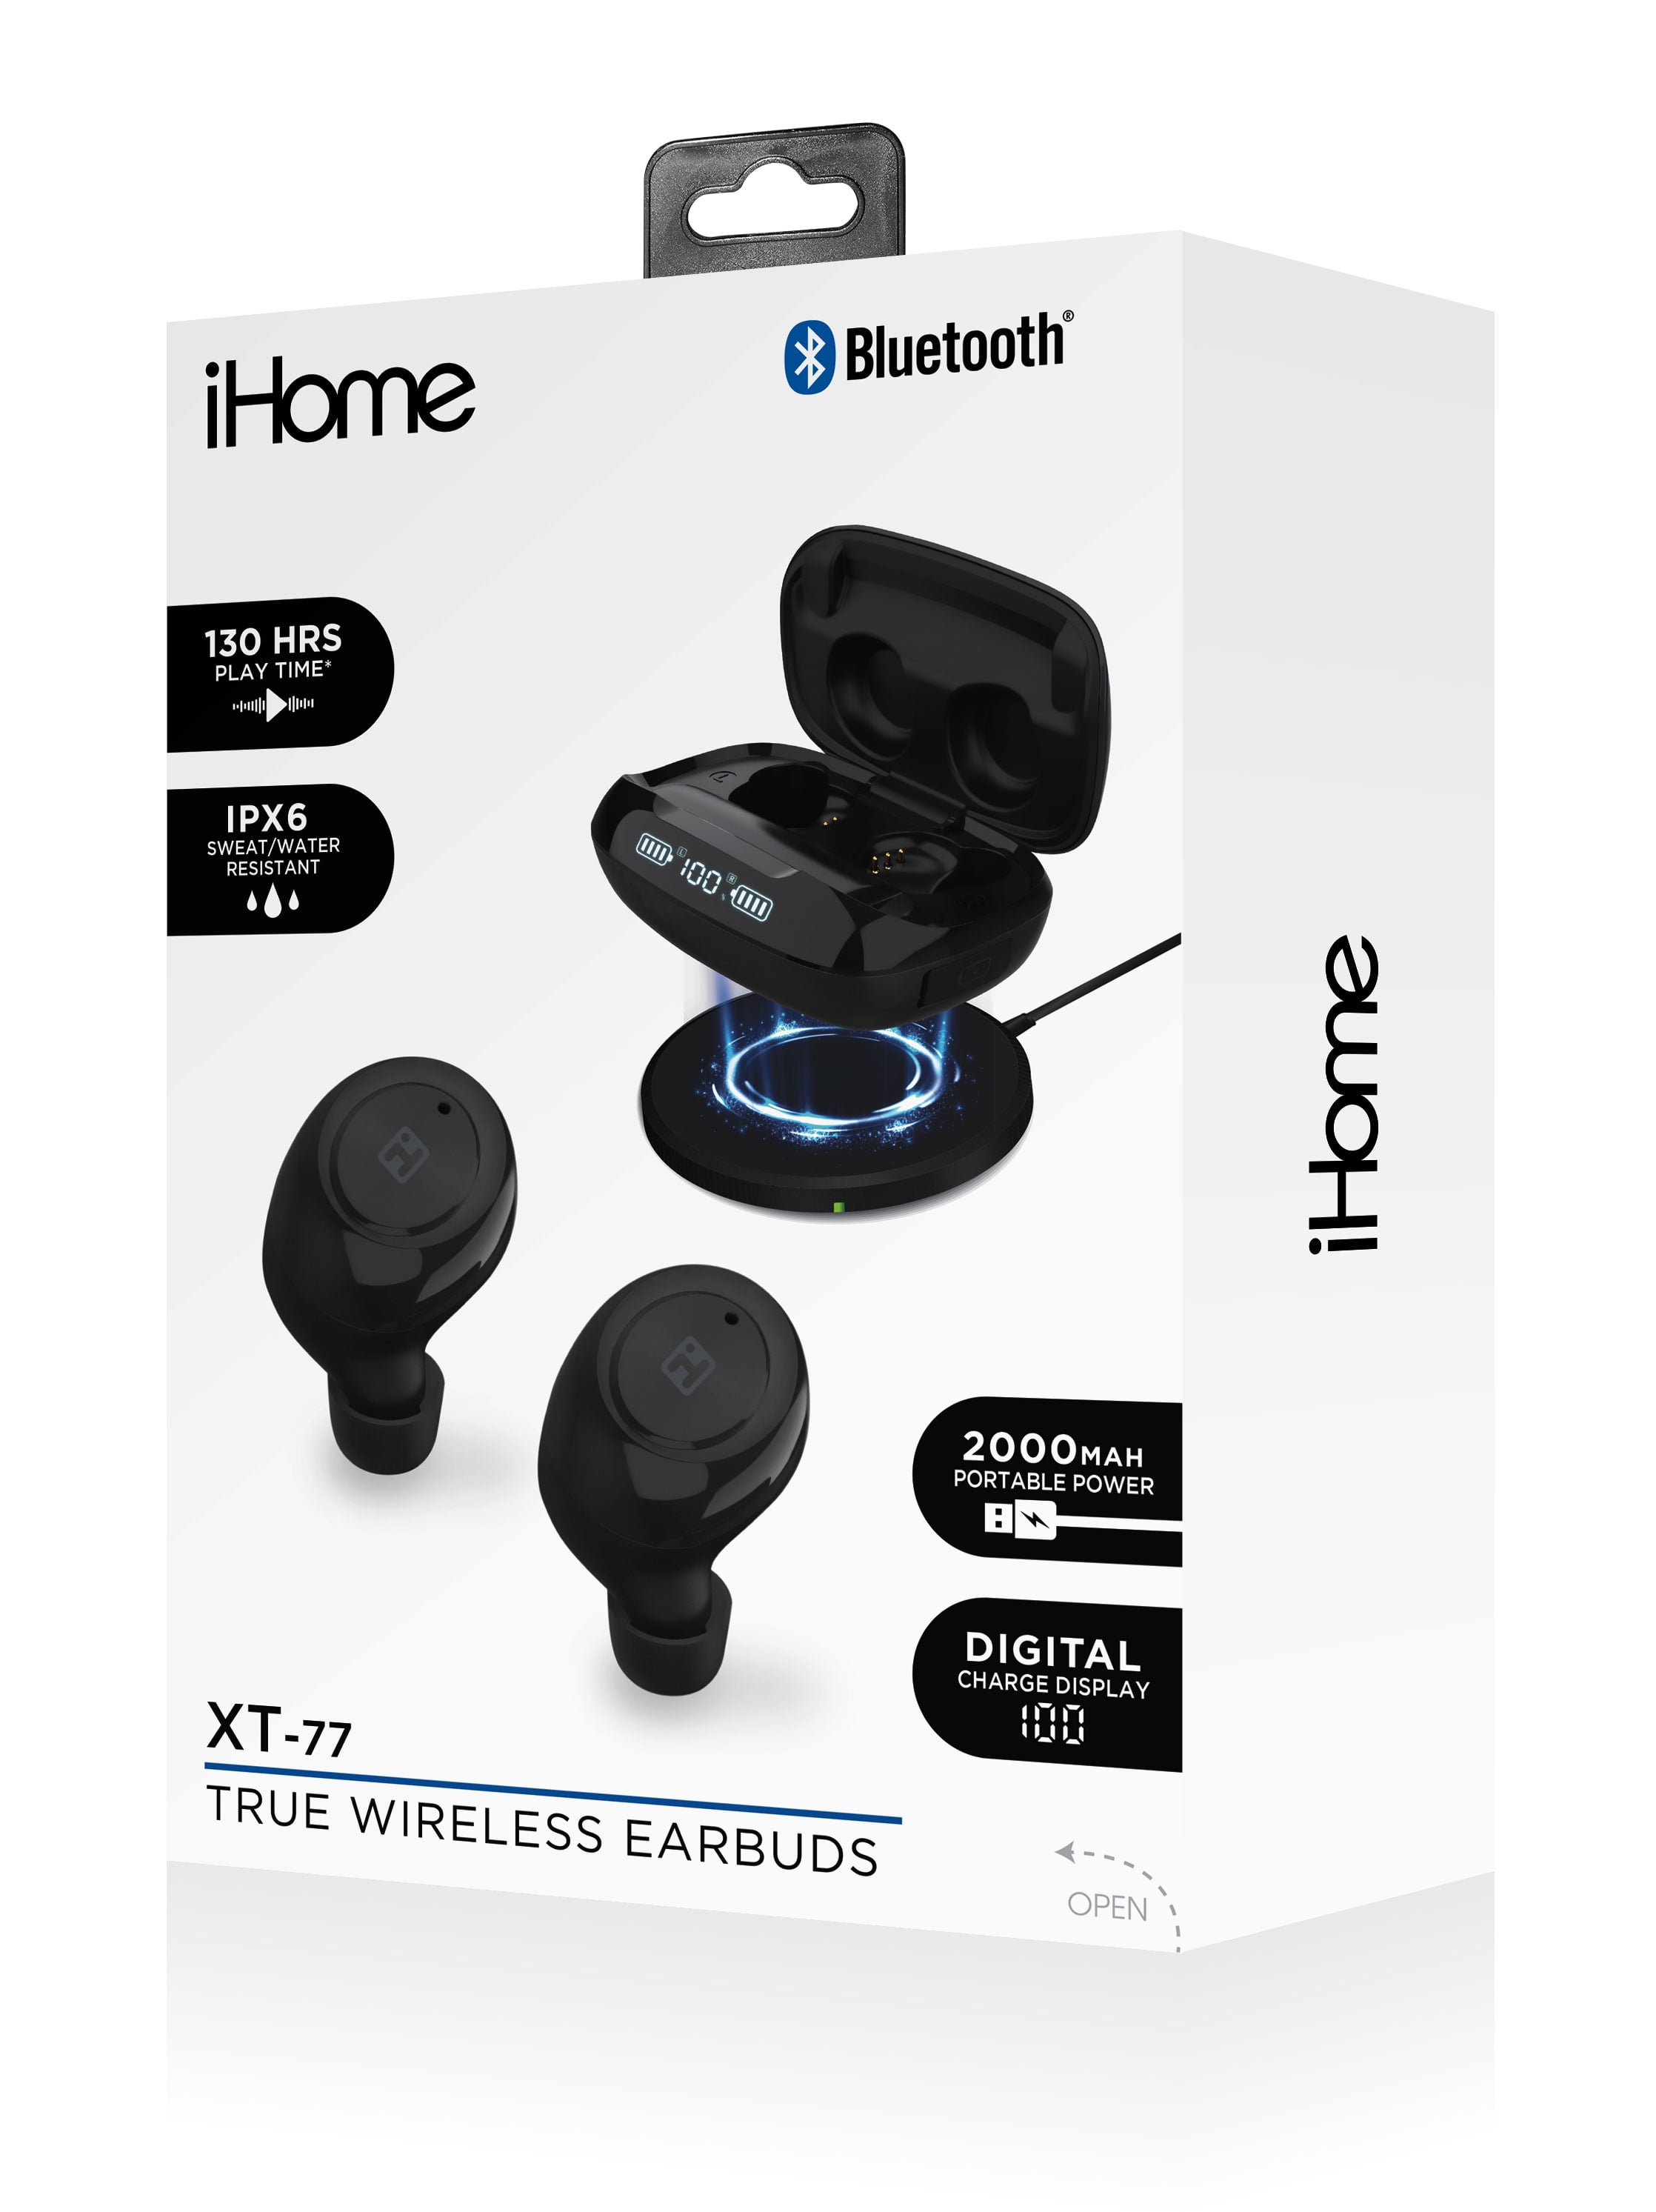 XT-77 True Wireless Earbuds with Built-In Battery and Wireless 